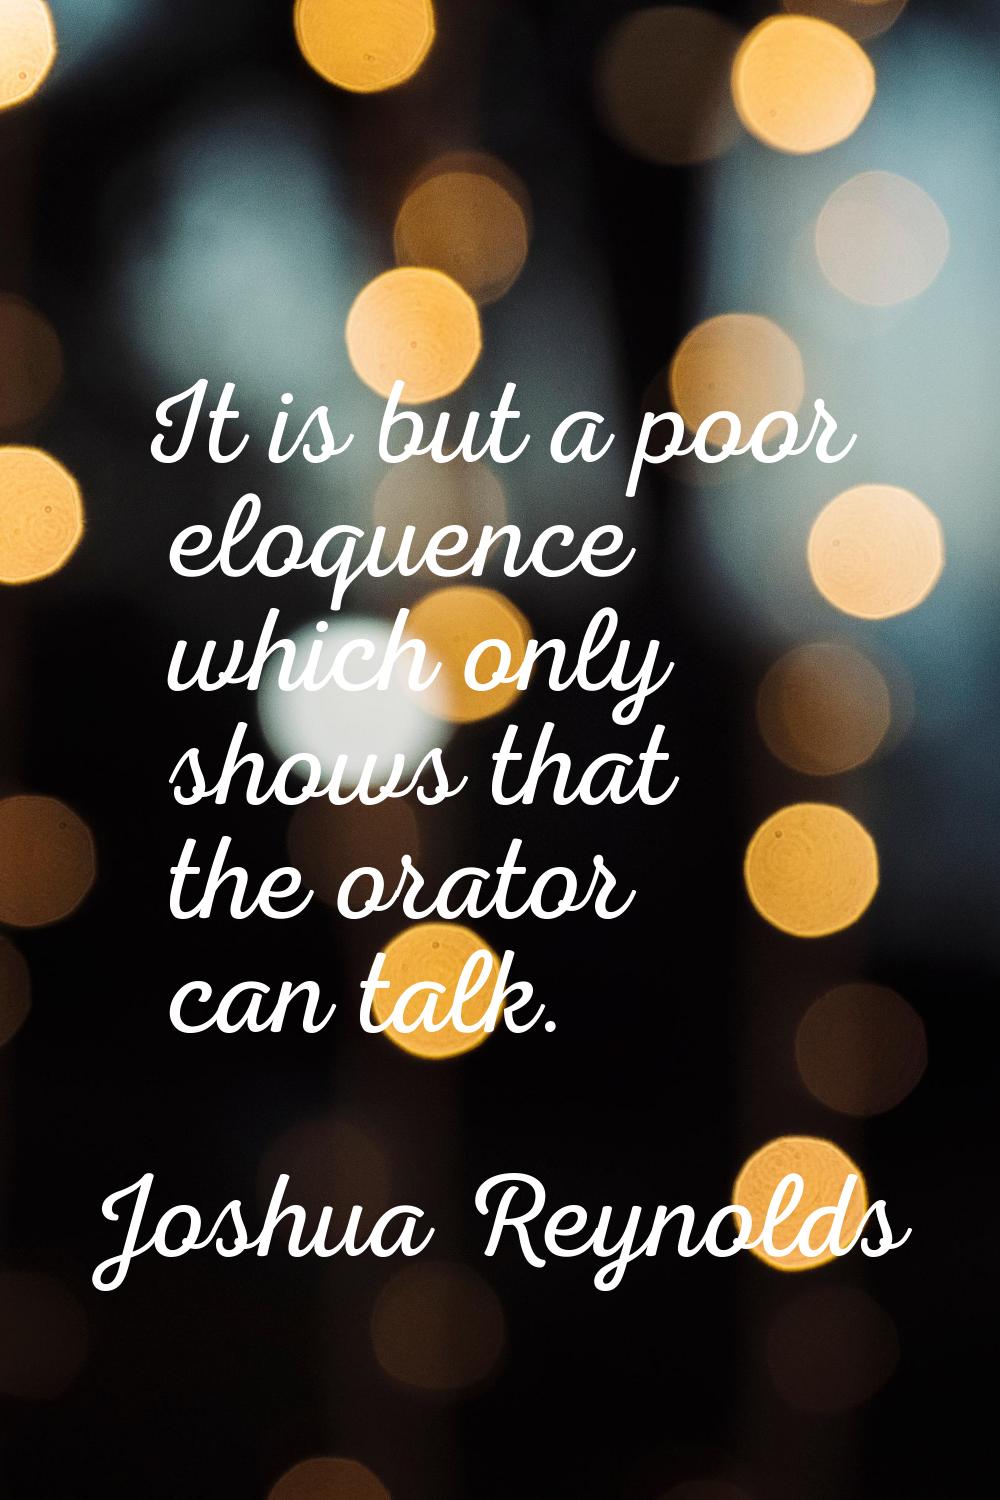 It is but a poor eloquence which only shows that the orator can talk.